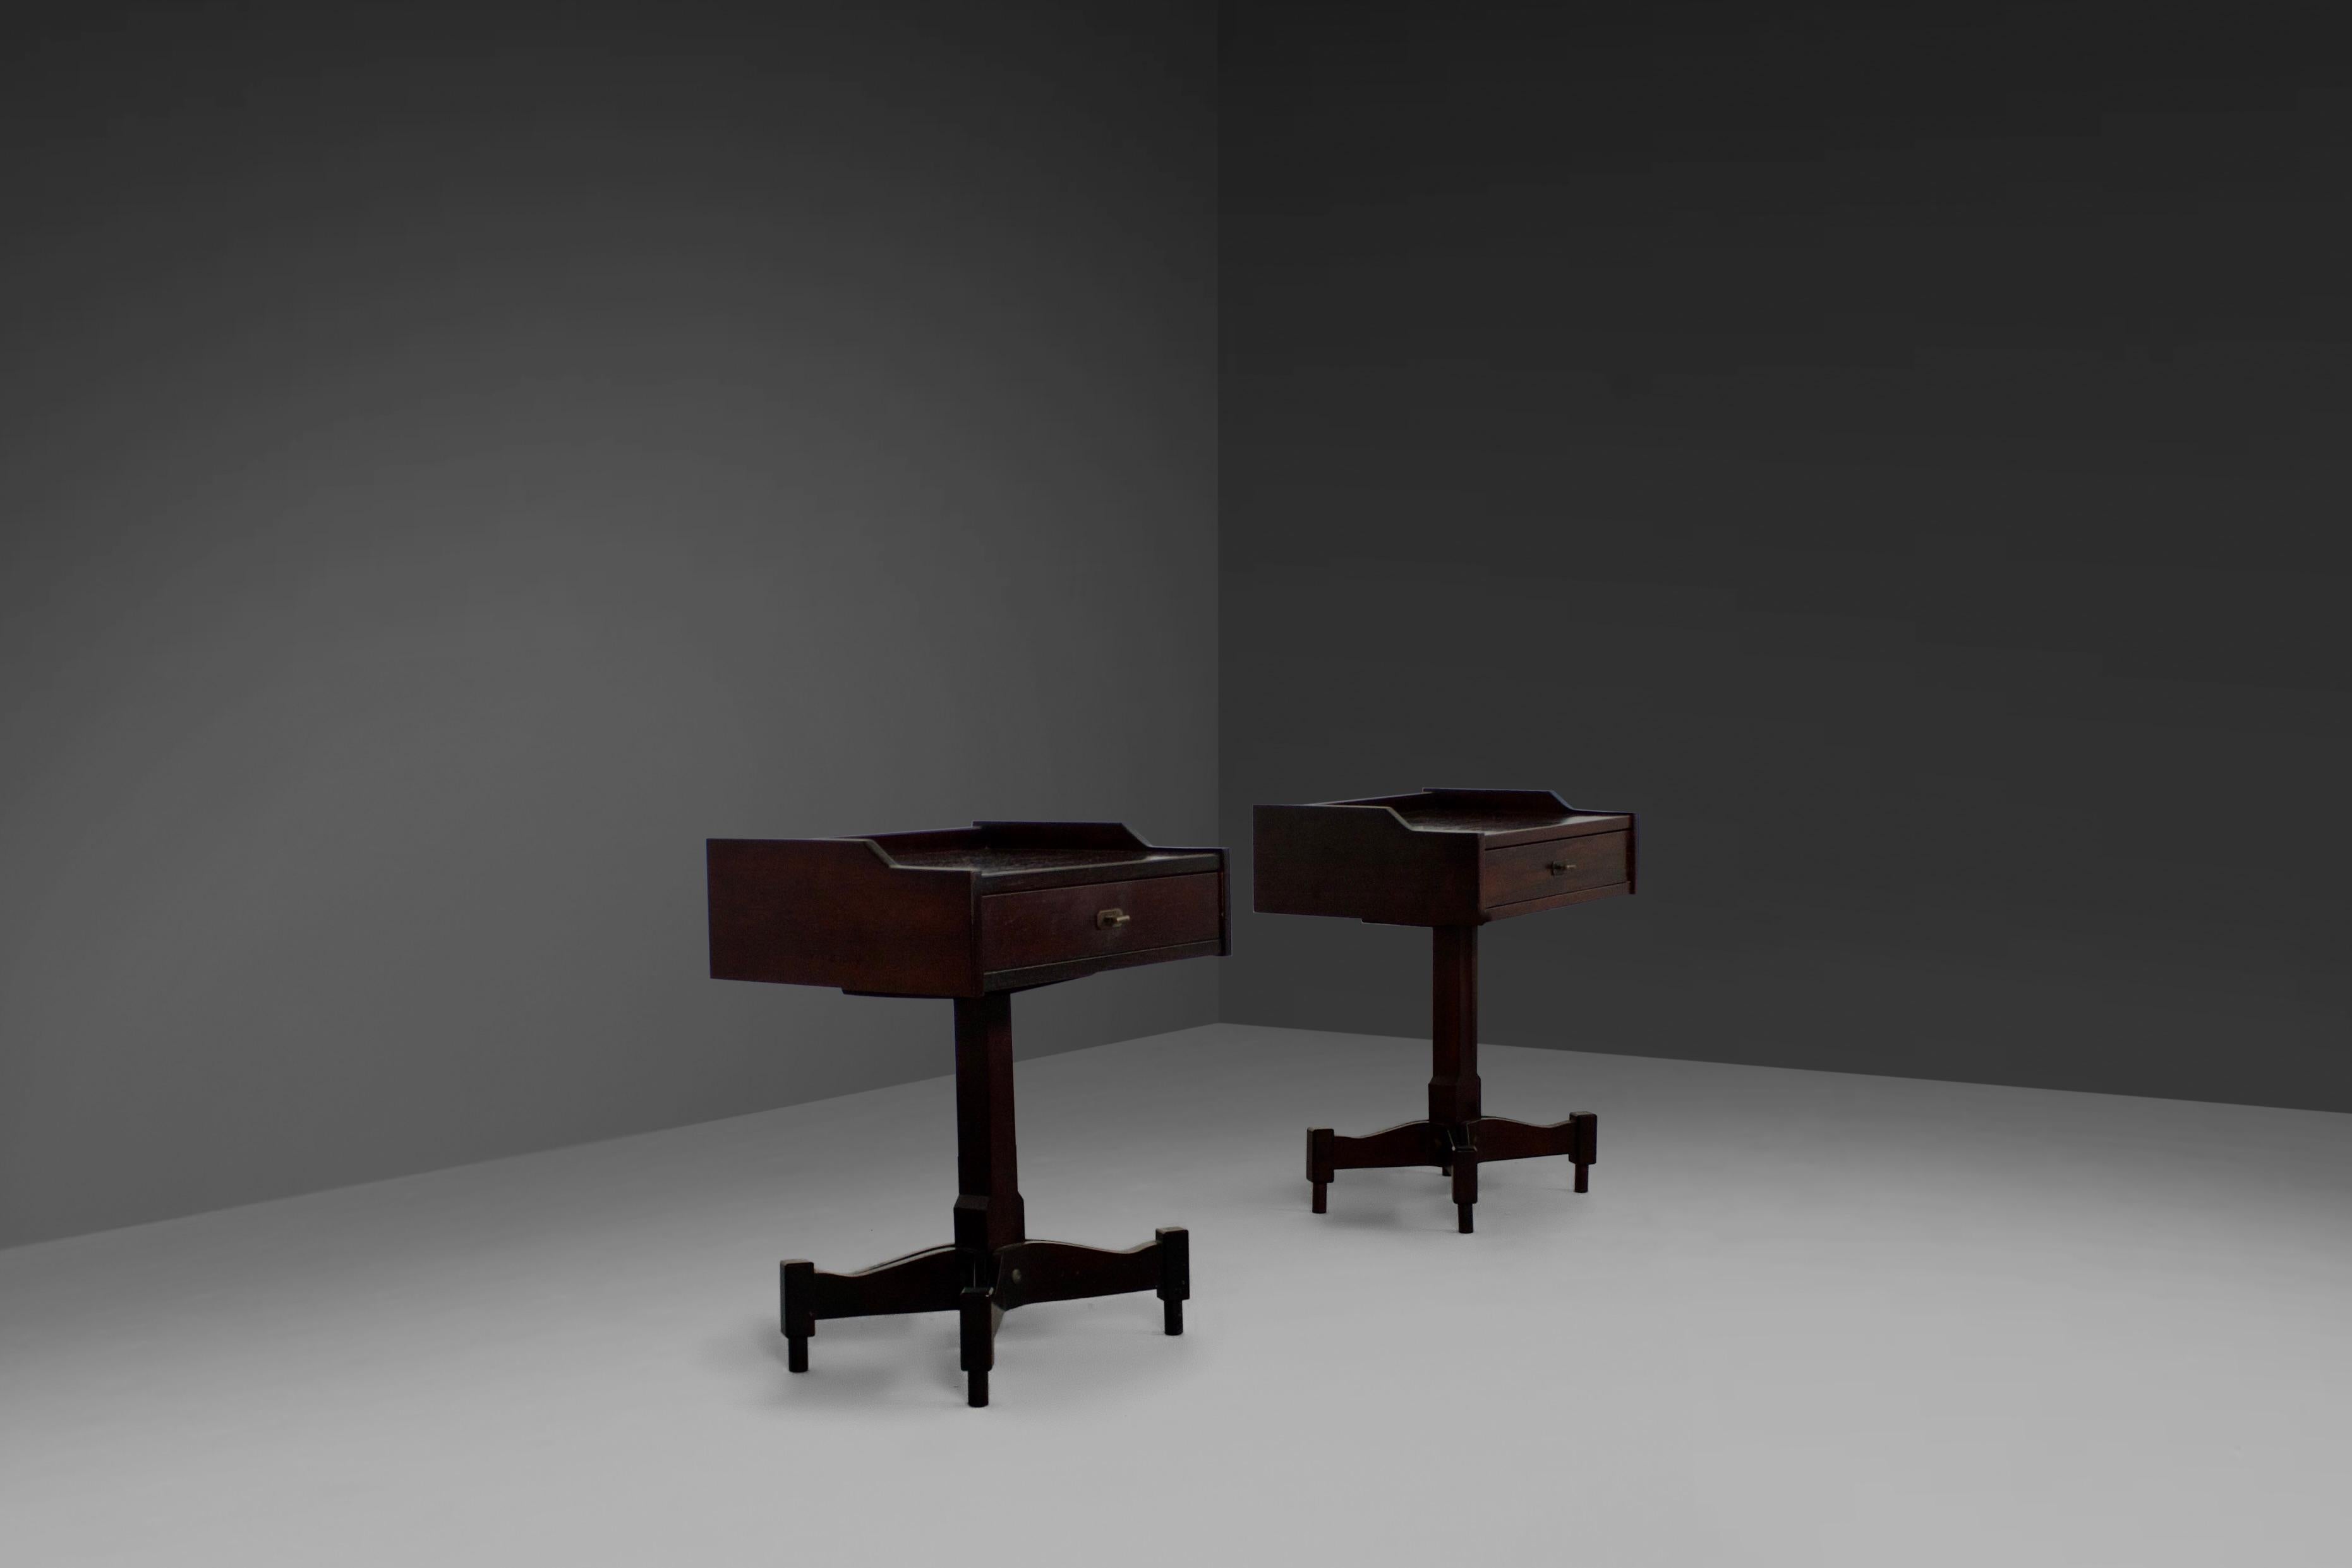 Mid-Century Modern Rosewood Occasional Tables by Claudio Salocchi for Sormani, Italy, 1960s For Sale